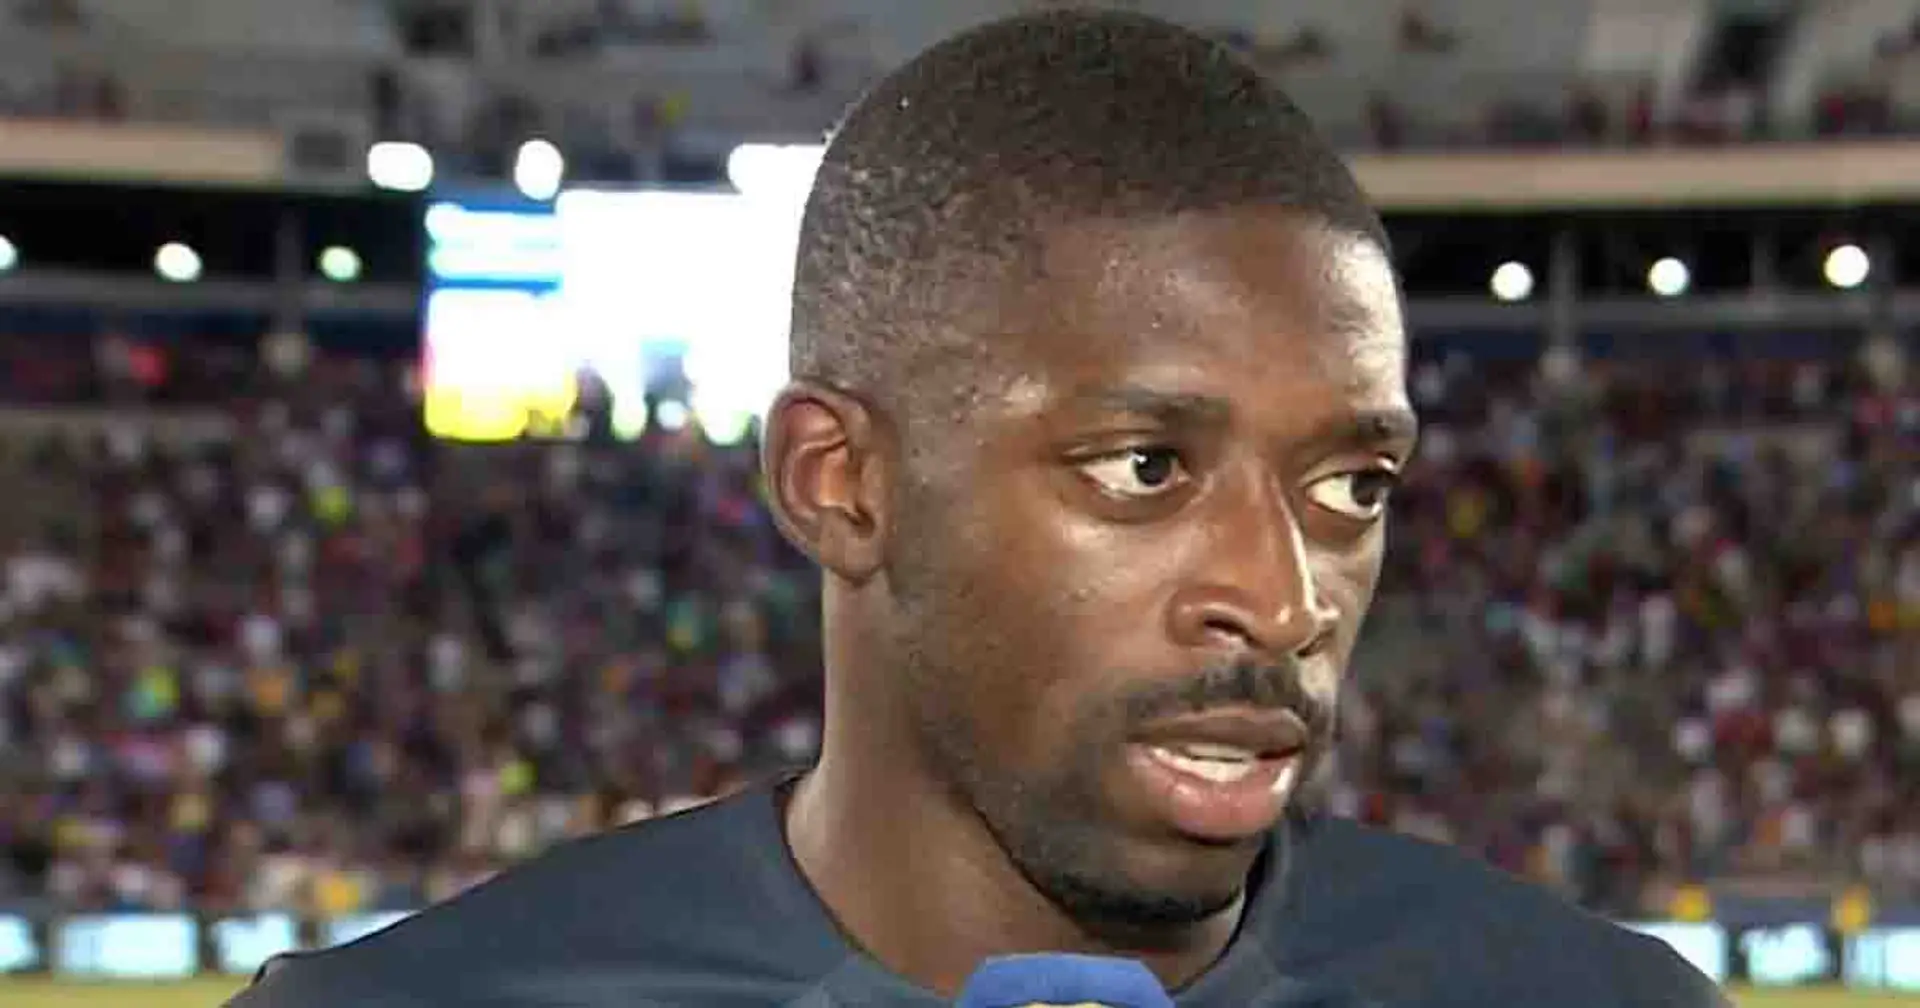 'I've been a Barca fan since I was little': Dembele clarifies talks over his future amid PSG links